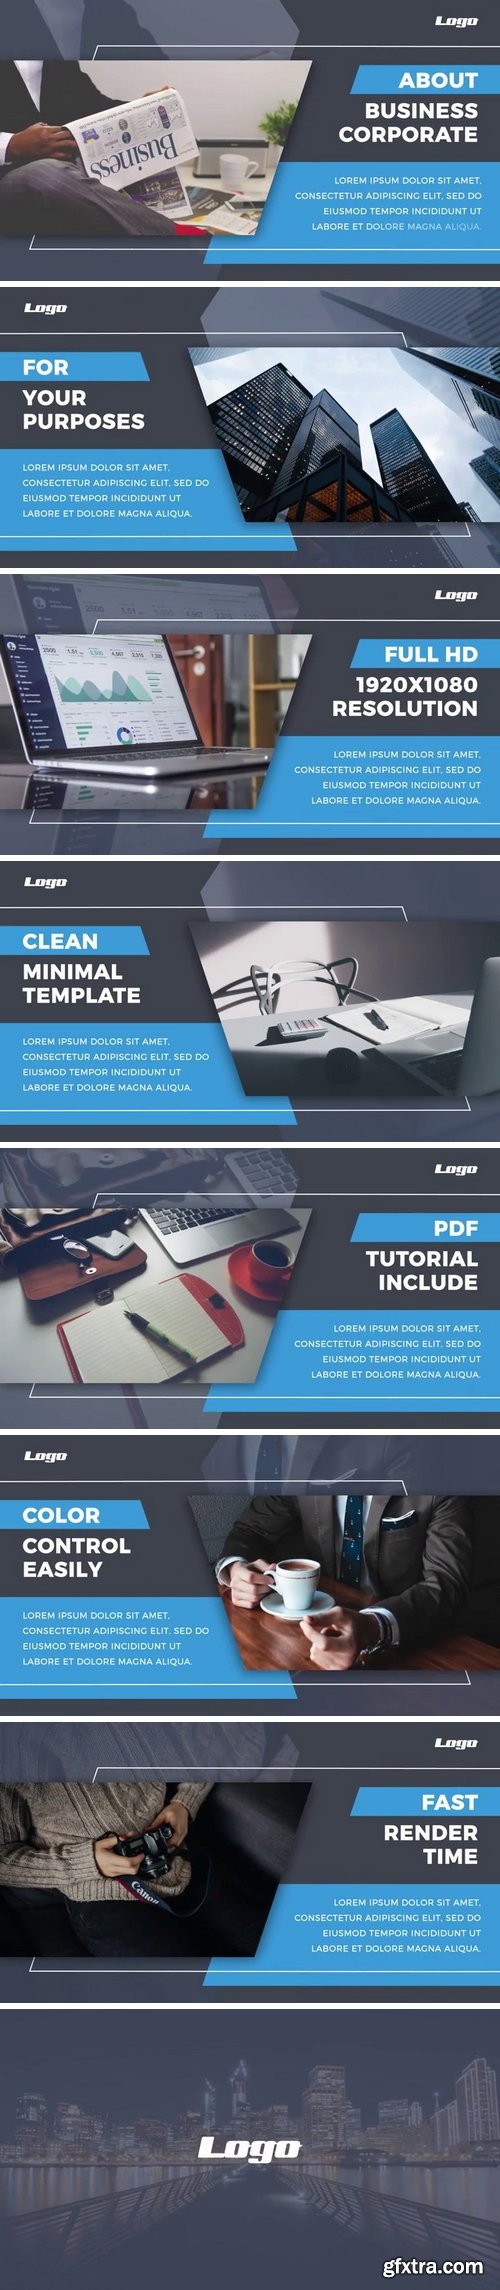 MA -  Minimal Corporate Promo After Effects Templates 151988